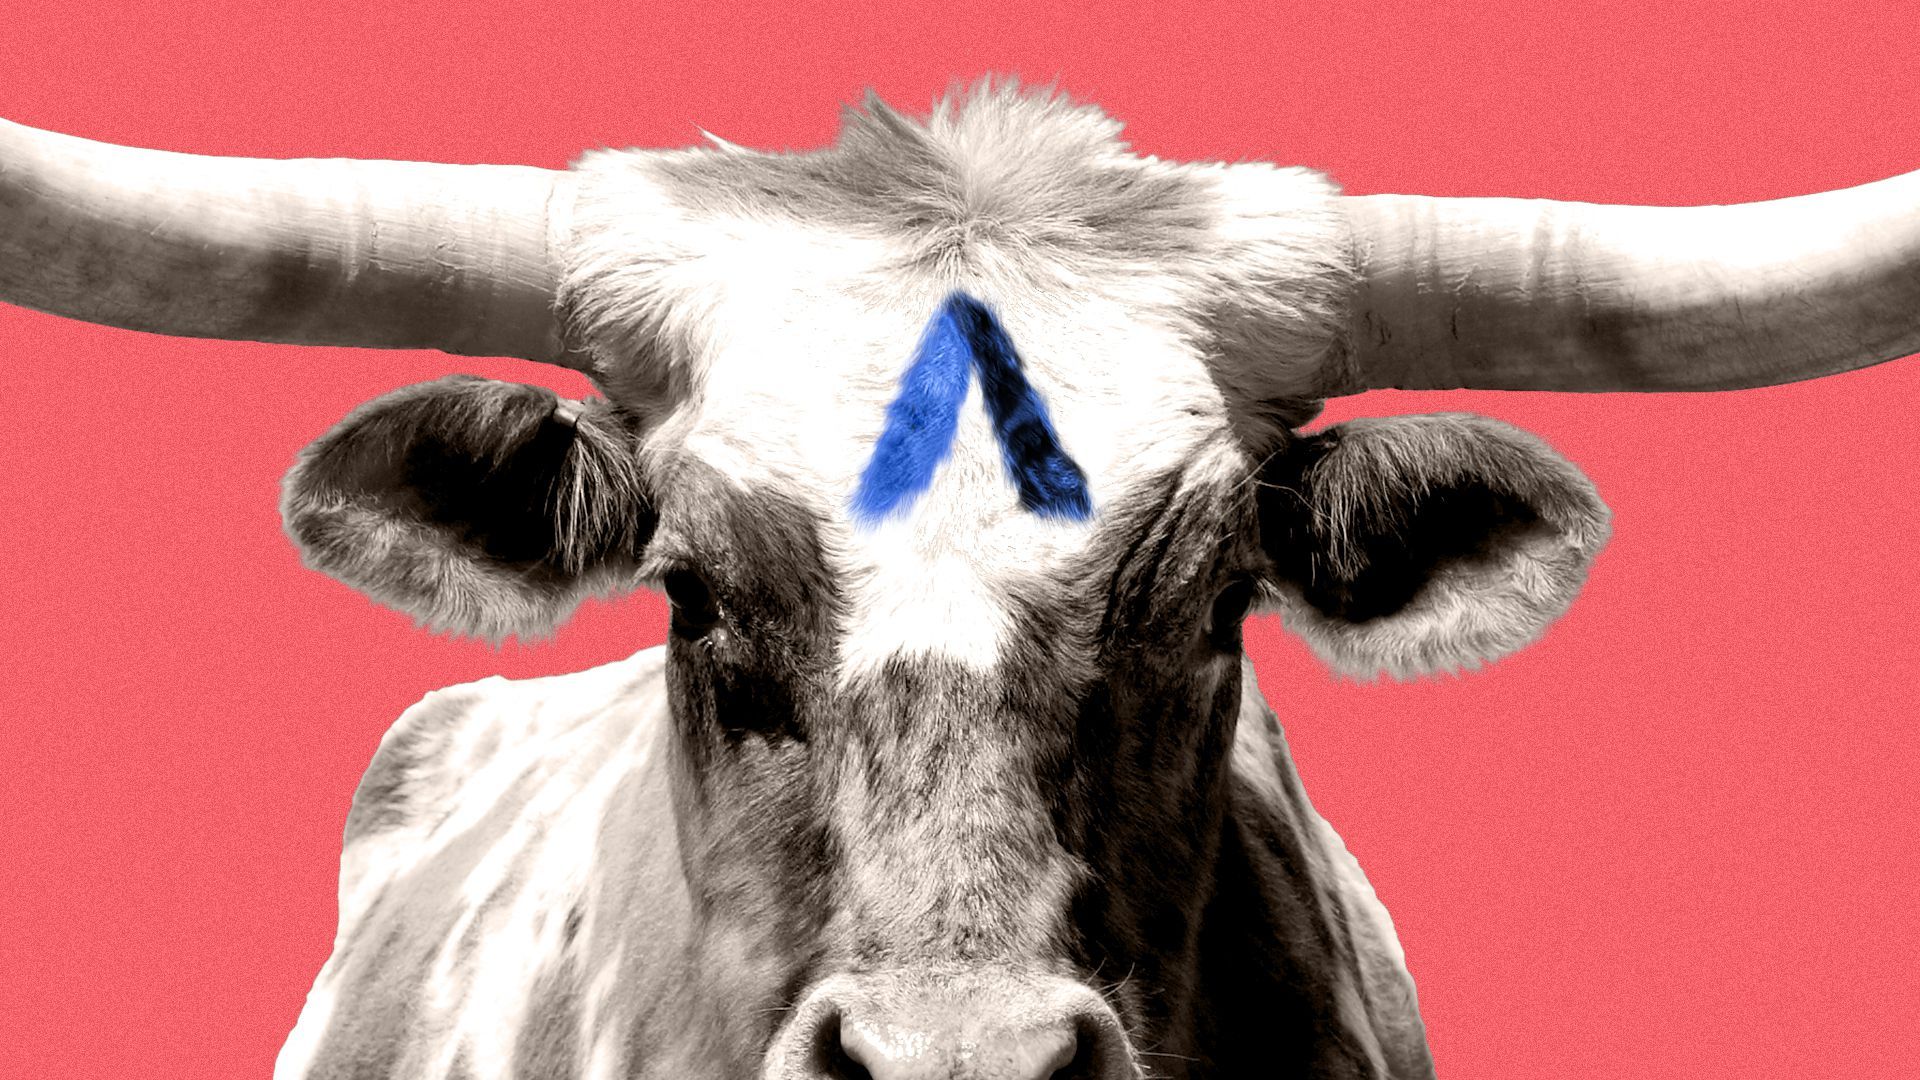 Illustration of a cow with a spot on its forehead in the shape of the Axios logo.